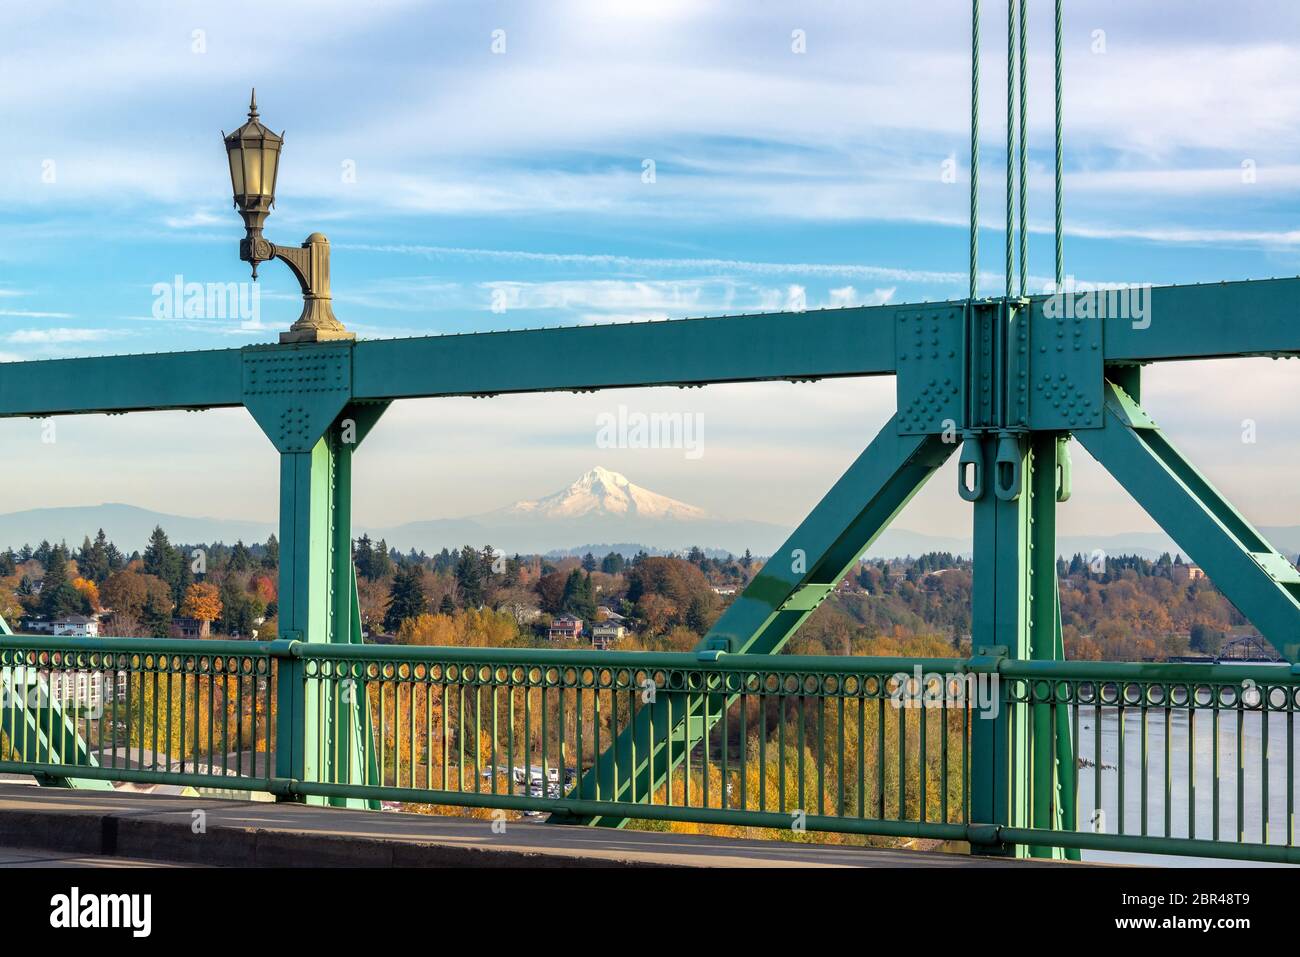 View of a portion of St. Johns Bridge in Portland, Oregon Mt. Hood in the background Stock Photo